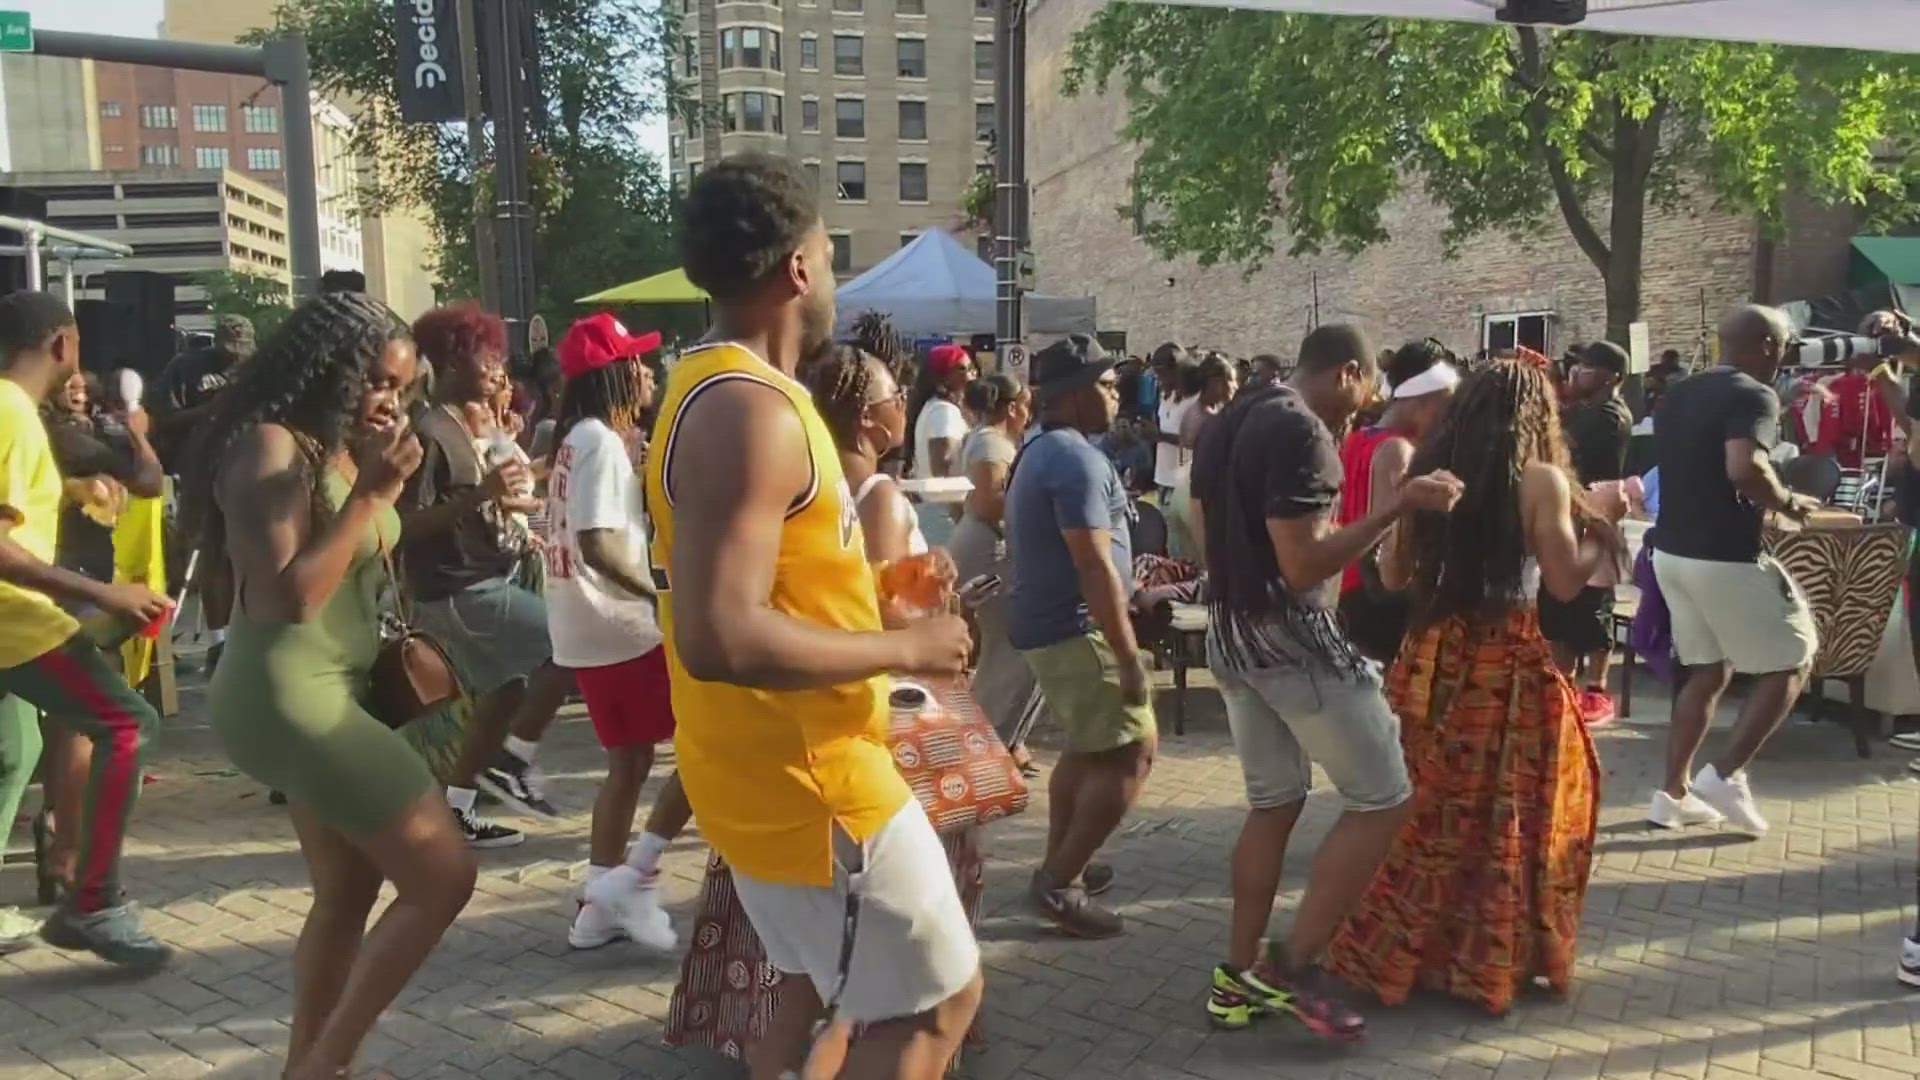 A lively street festival took over Washington Avenue in downtown St. Louis on Wednesday.